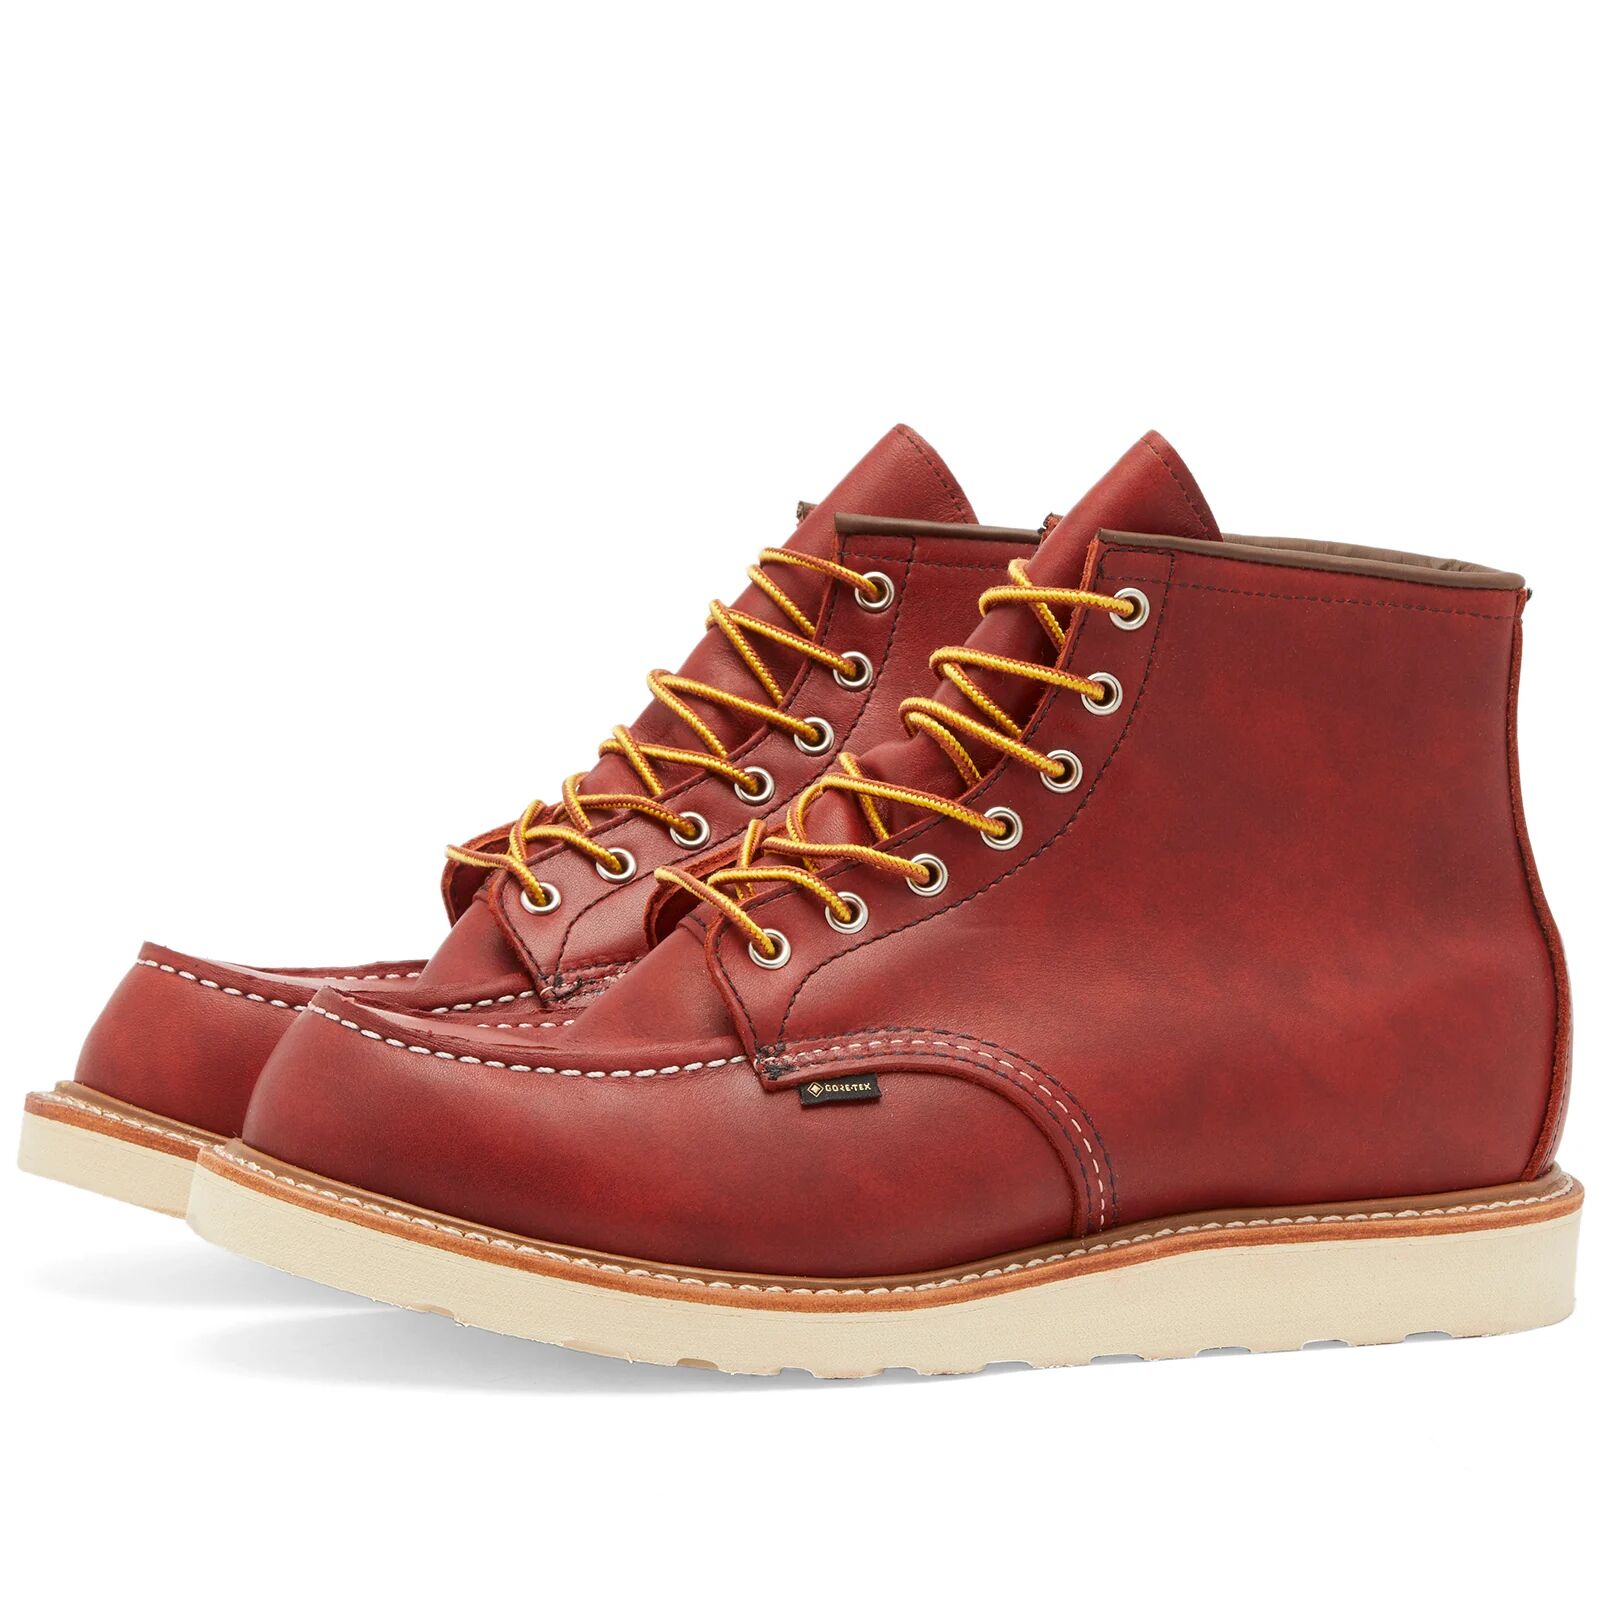 Red Wing Men's 8864 Heritage Work 6" Moc Toe Gore-Tex Boot in Russet Taos, Size UK 9.5